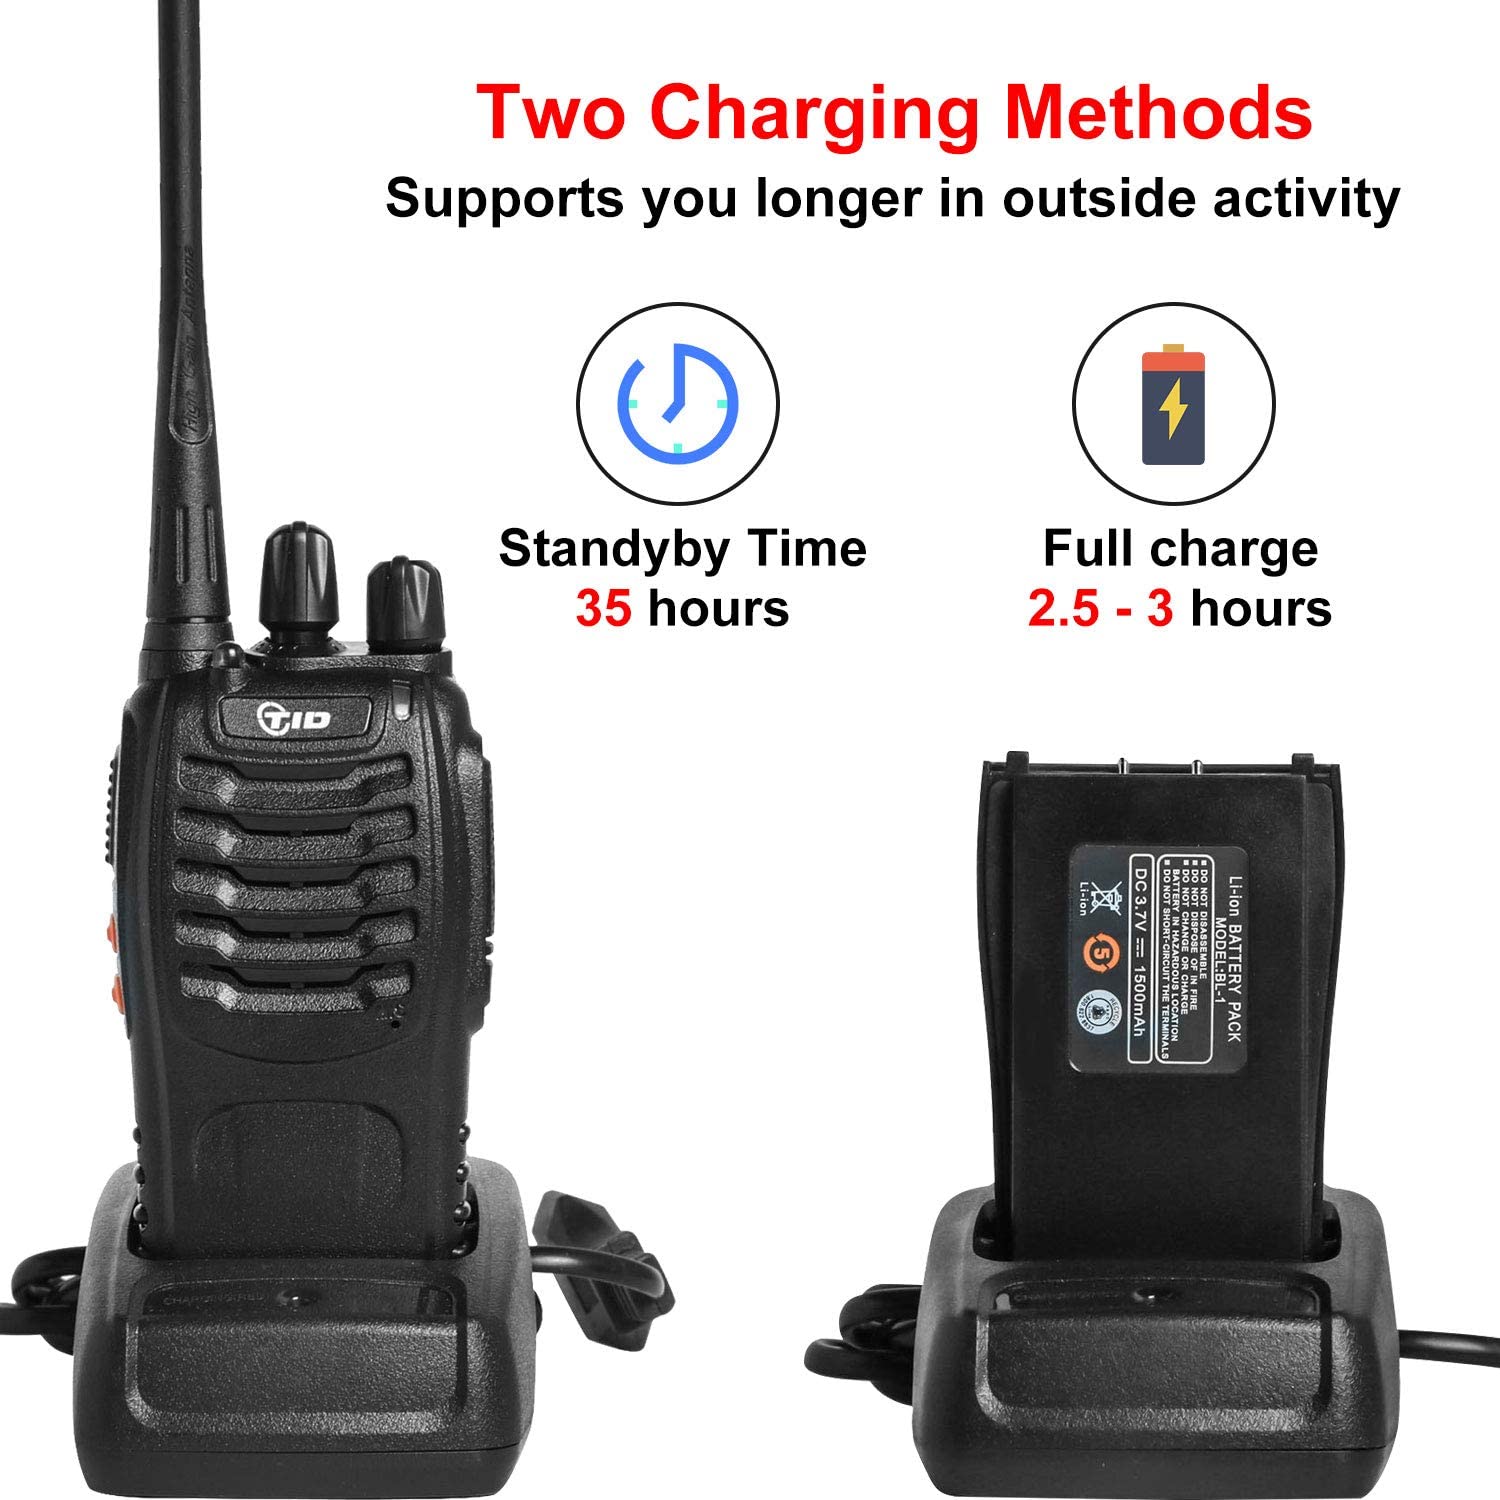 TIDRADIO TD-V2 Walkie Talkies for Adults with Earpiece Way Radios Walkie Talkies Long Range Hand Free with Flashilght Two Way Radio Rechargeable for - 2